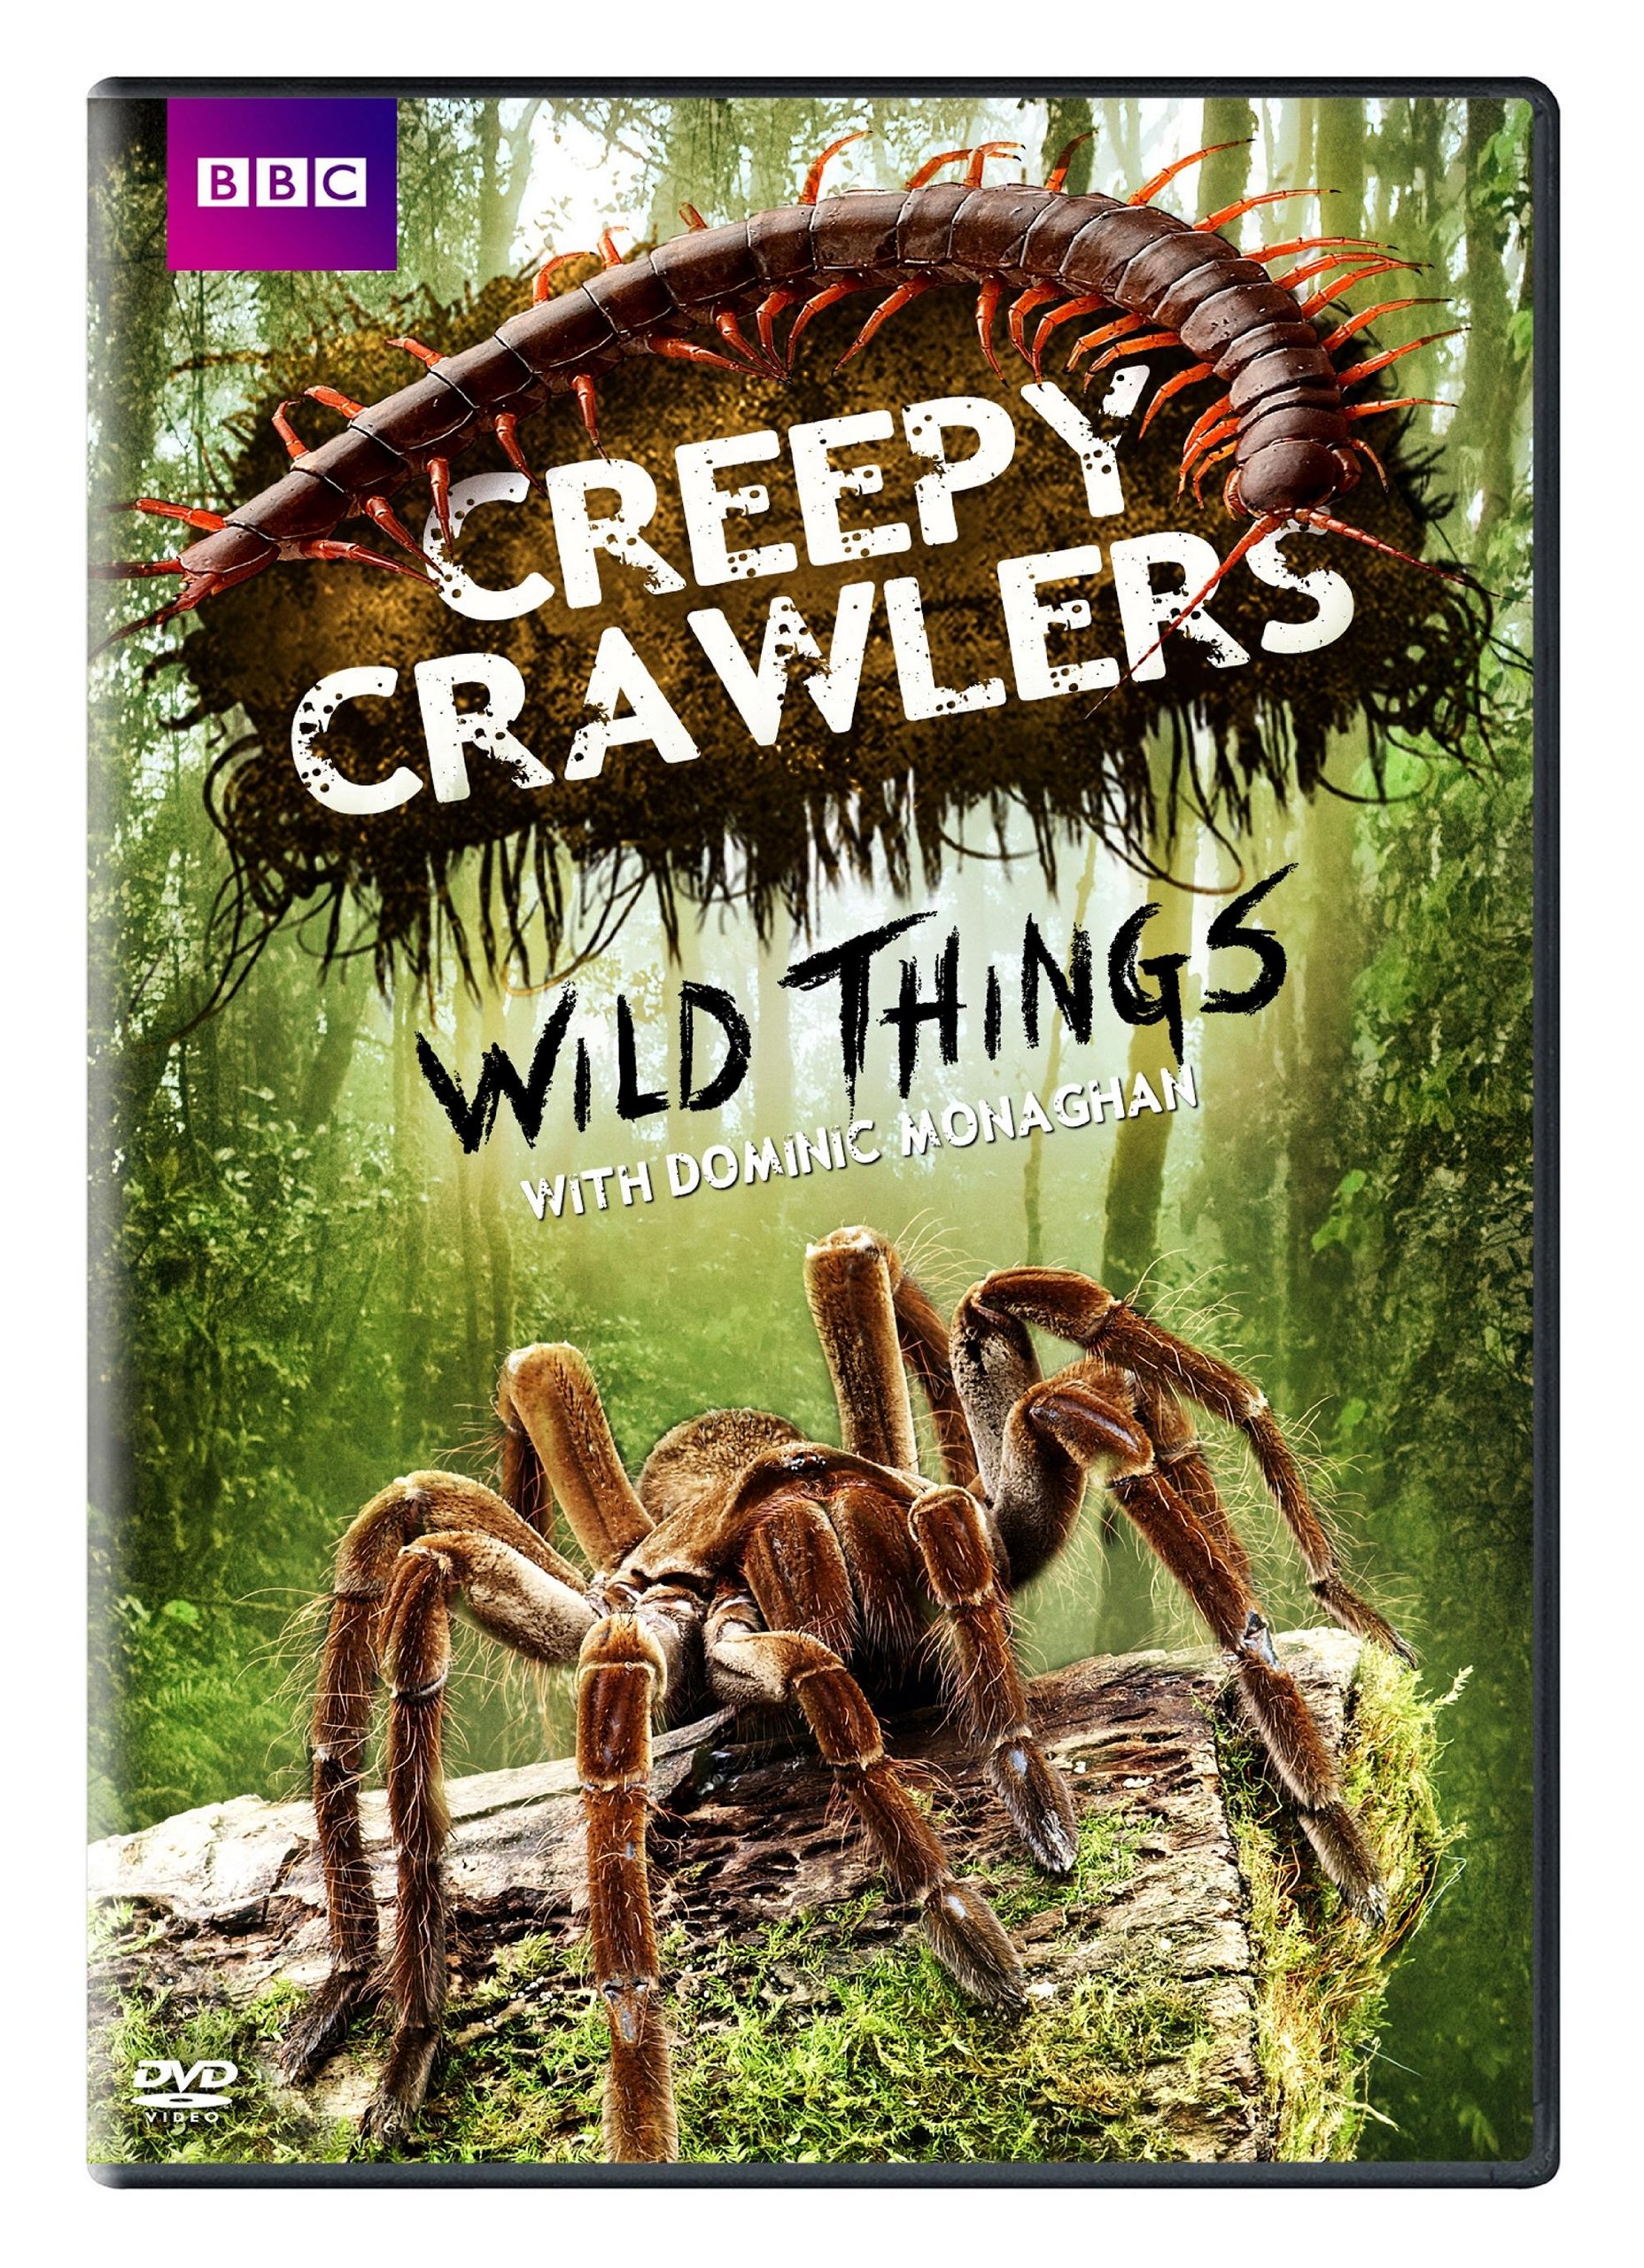 Creepy Crawlers: Wild Things with Dominic Monaghan [DVD] - image 1 of 2